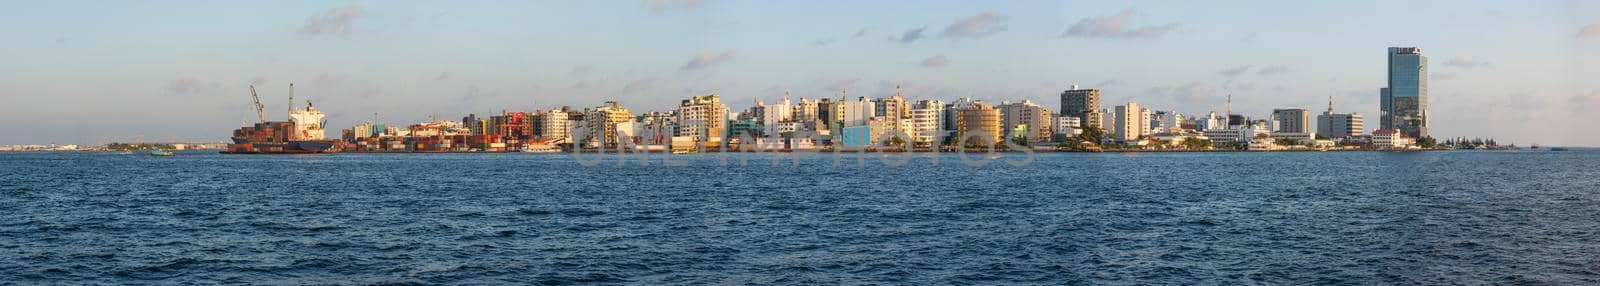 Panoramic view of large island city of Male in Maldives by paulvinten